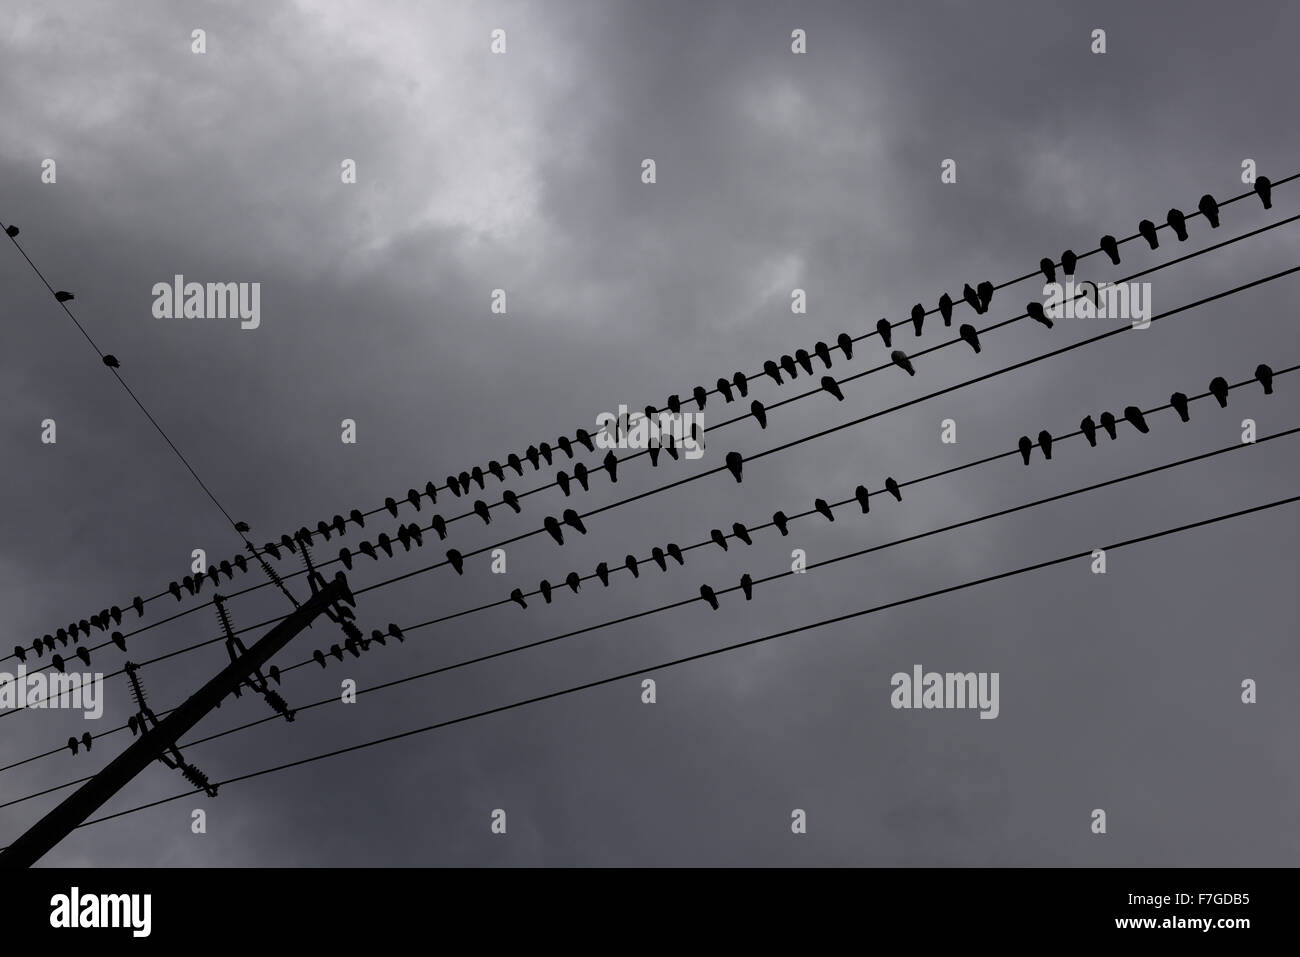 Flock of pigeons resting and lined up on hydro wires against dark clouds Stock Photo